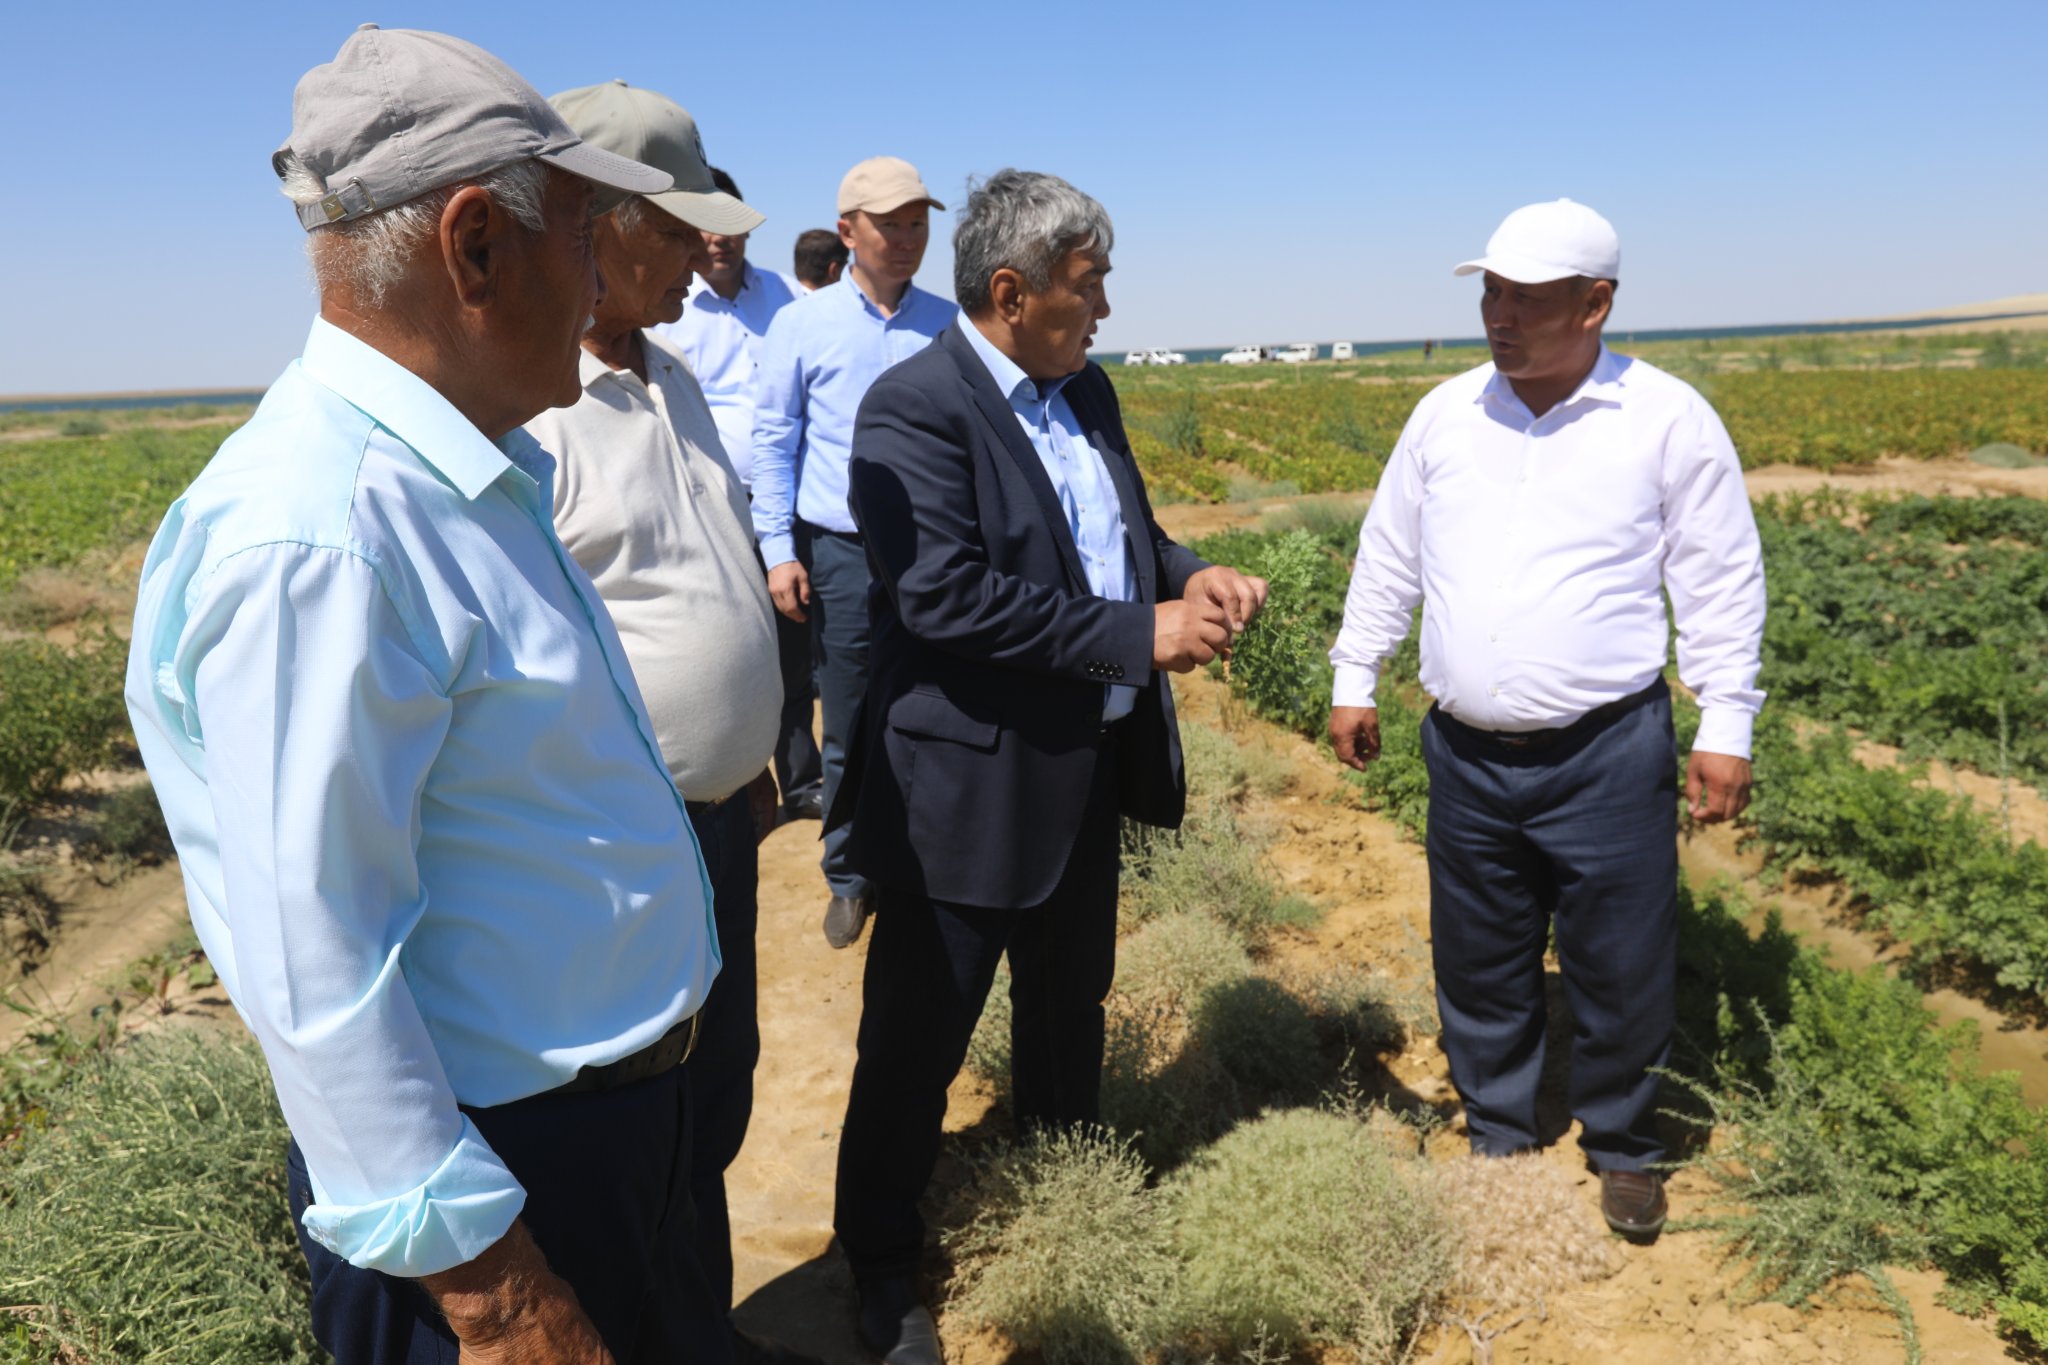 Akim of the district visited the fields, inspected the repair of canals